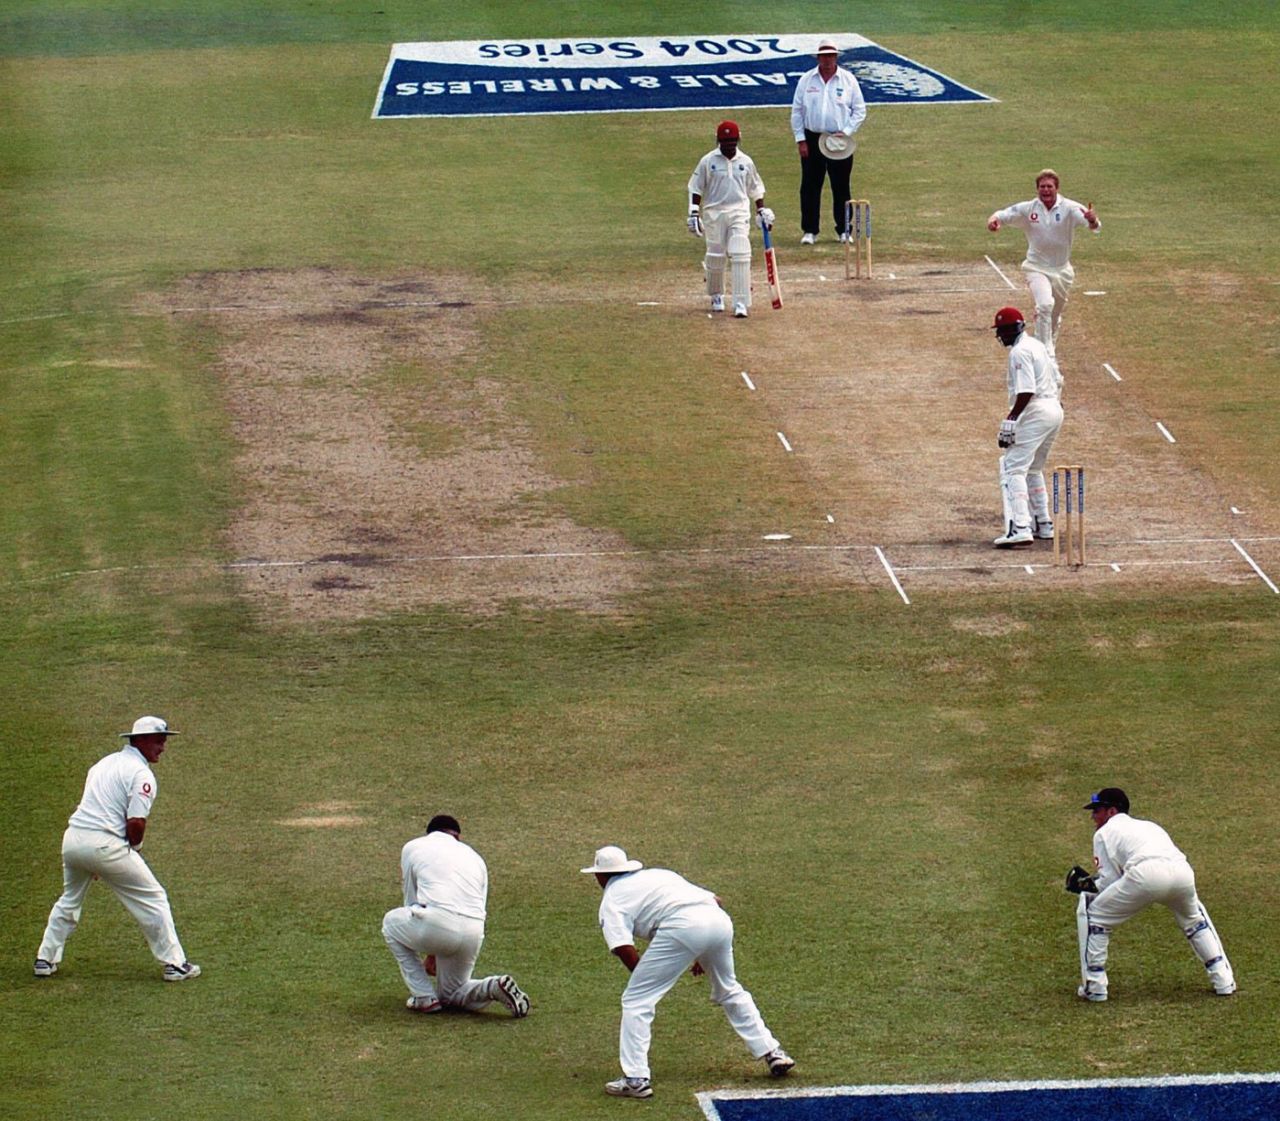 Andrew Flintoff's catch of Ryan Hinds gave Matthew Hoggard his hat-trick wicket, West Indies v England, 3rd Test, Barbados, 3rd day, April 3, 2004